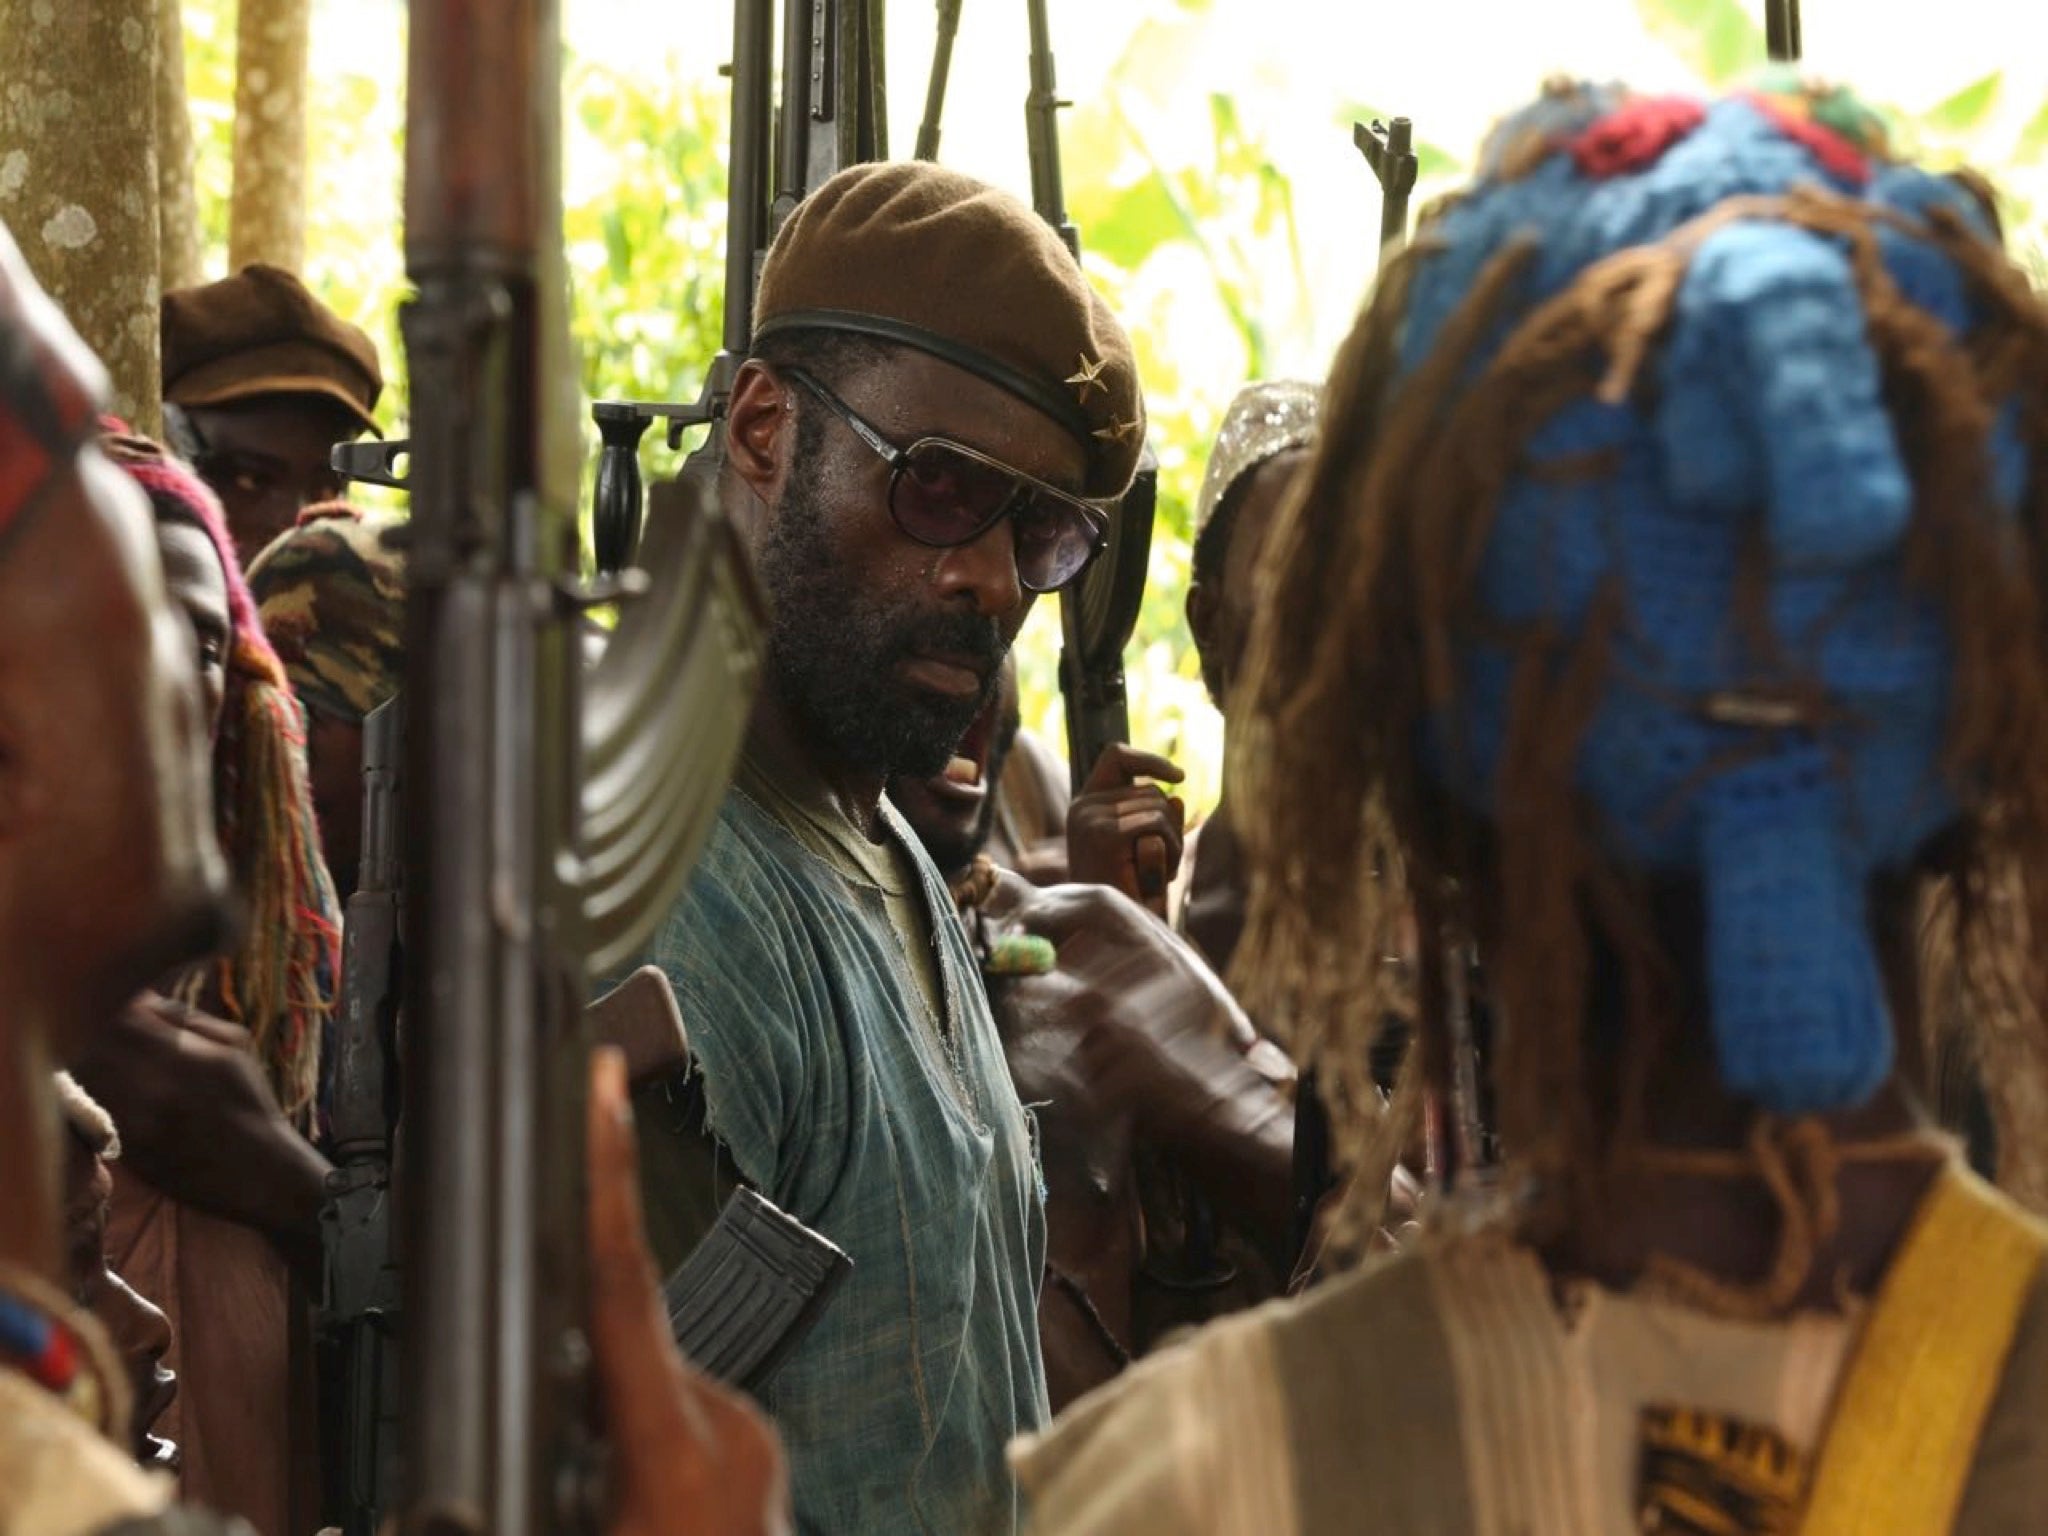 Beasts of No Nation is set in an unidentified African country